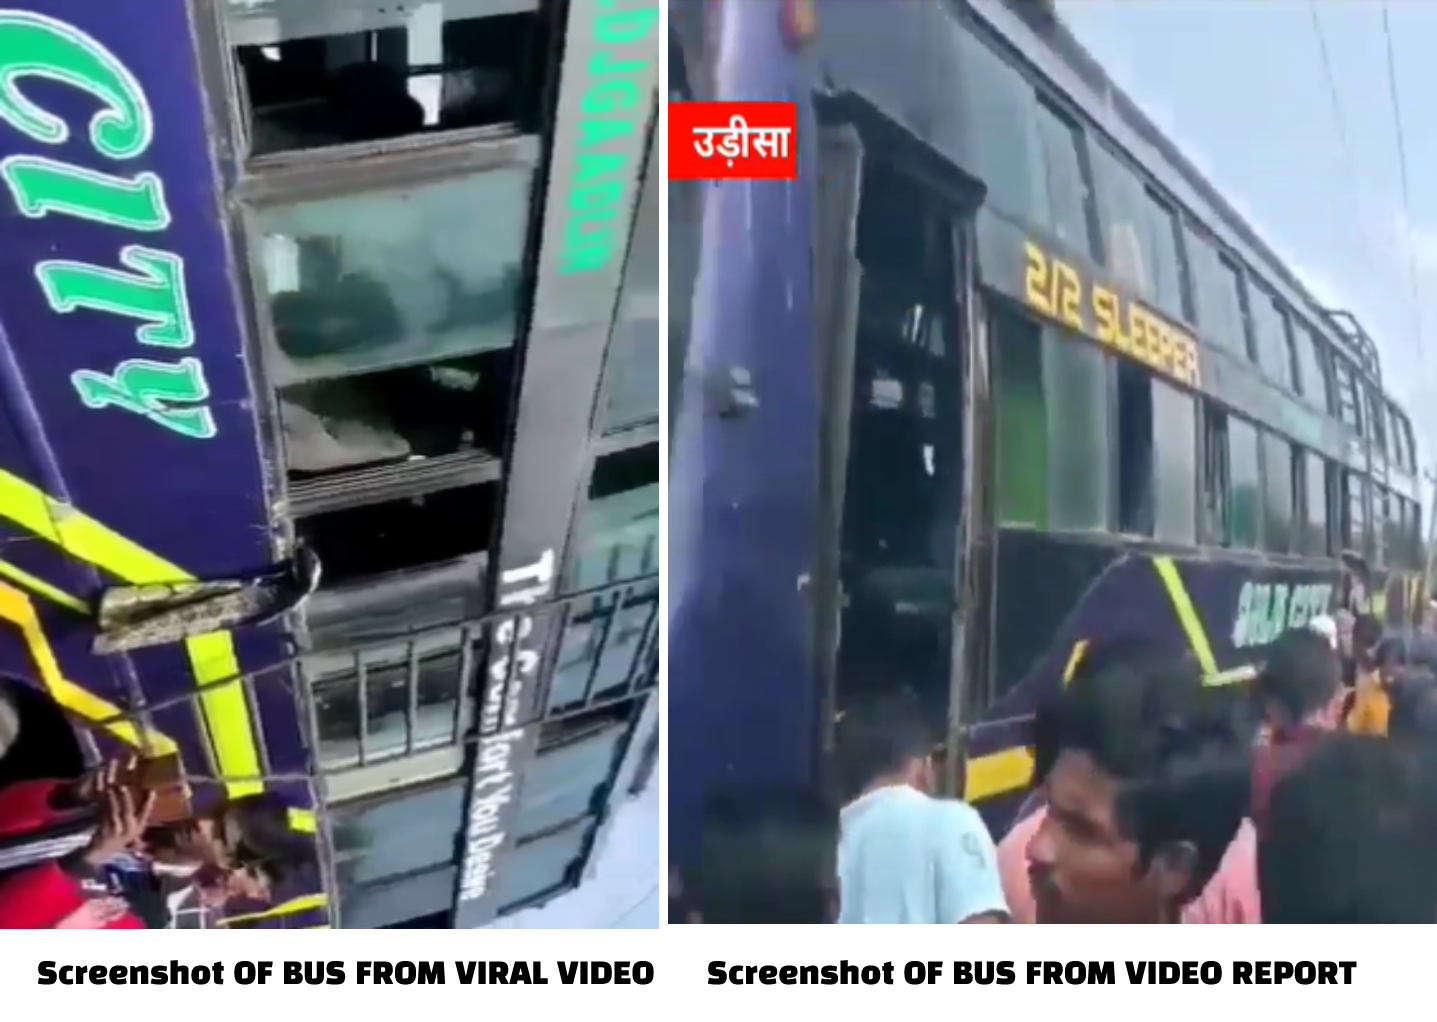 Comparison OF BUS FROM VIRAL VIDEO & REPORT (Credits: Asian Times)